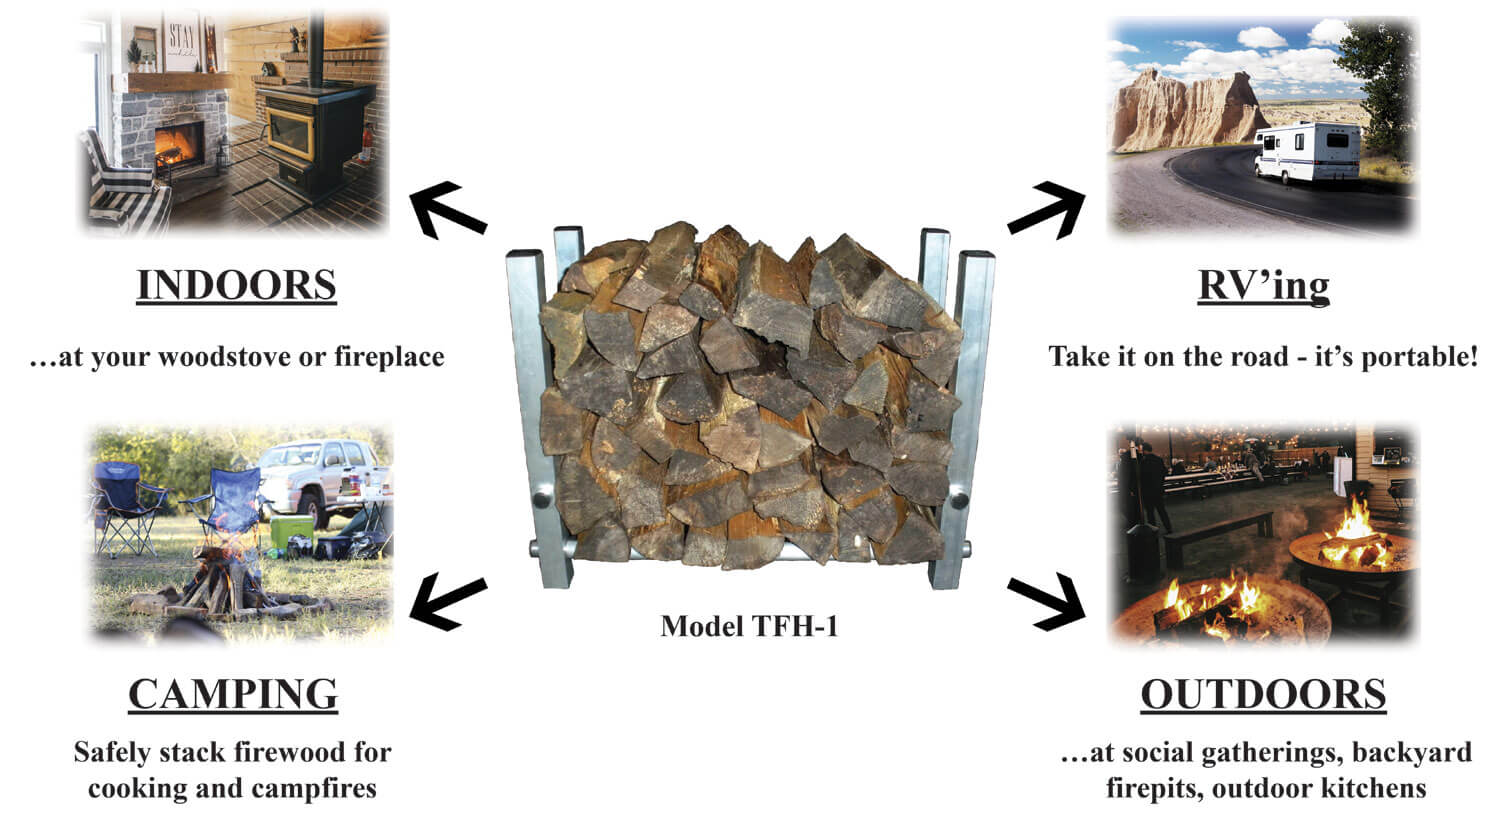 image of firewood holder with wood pointing to images of woodstove, fireplace campfire, firepits and an RV mobile home